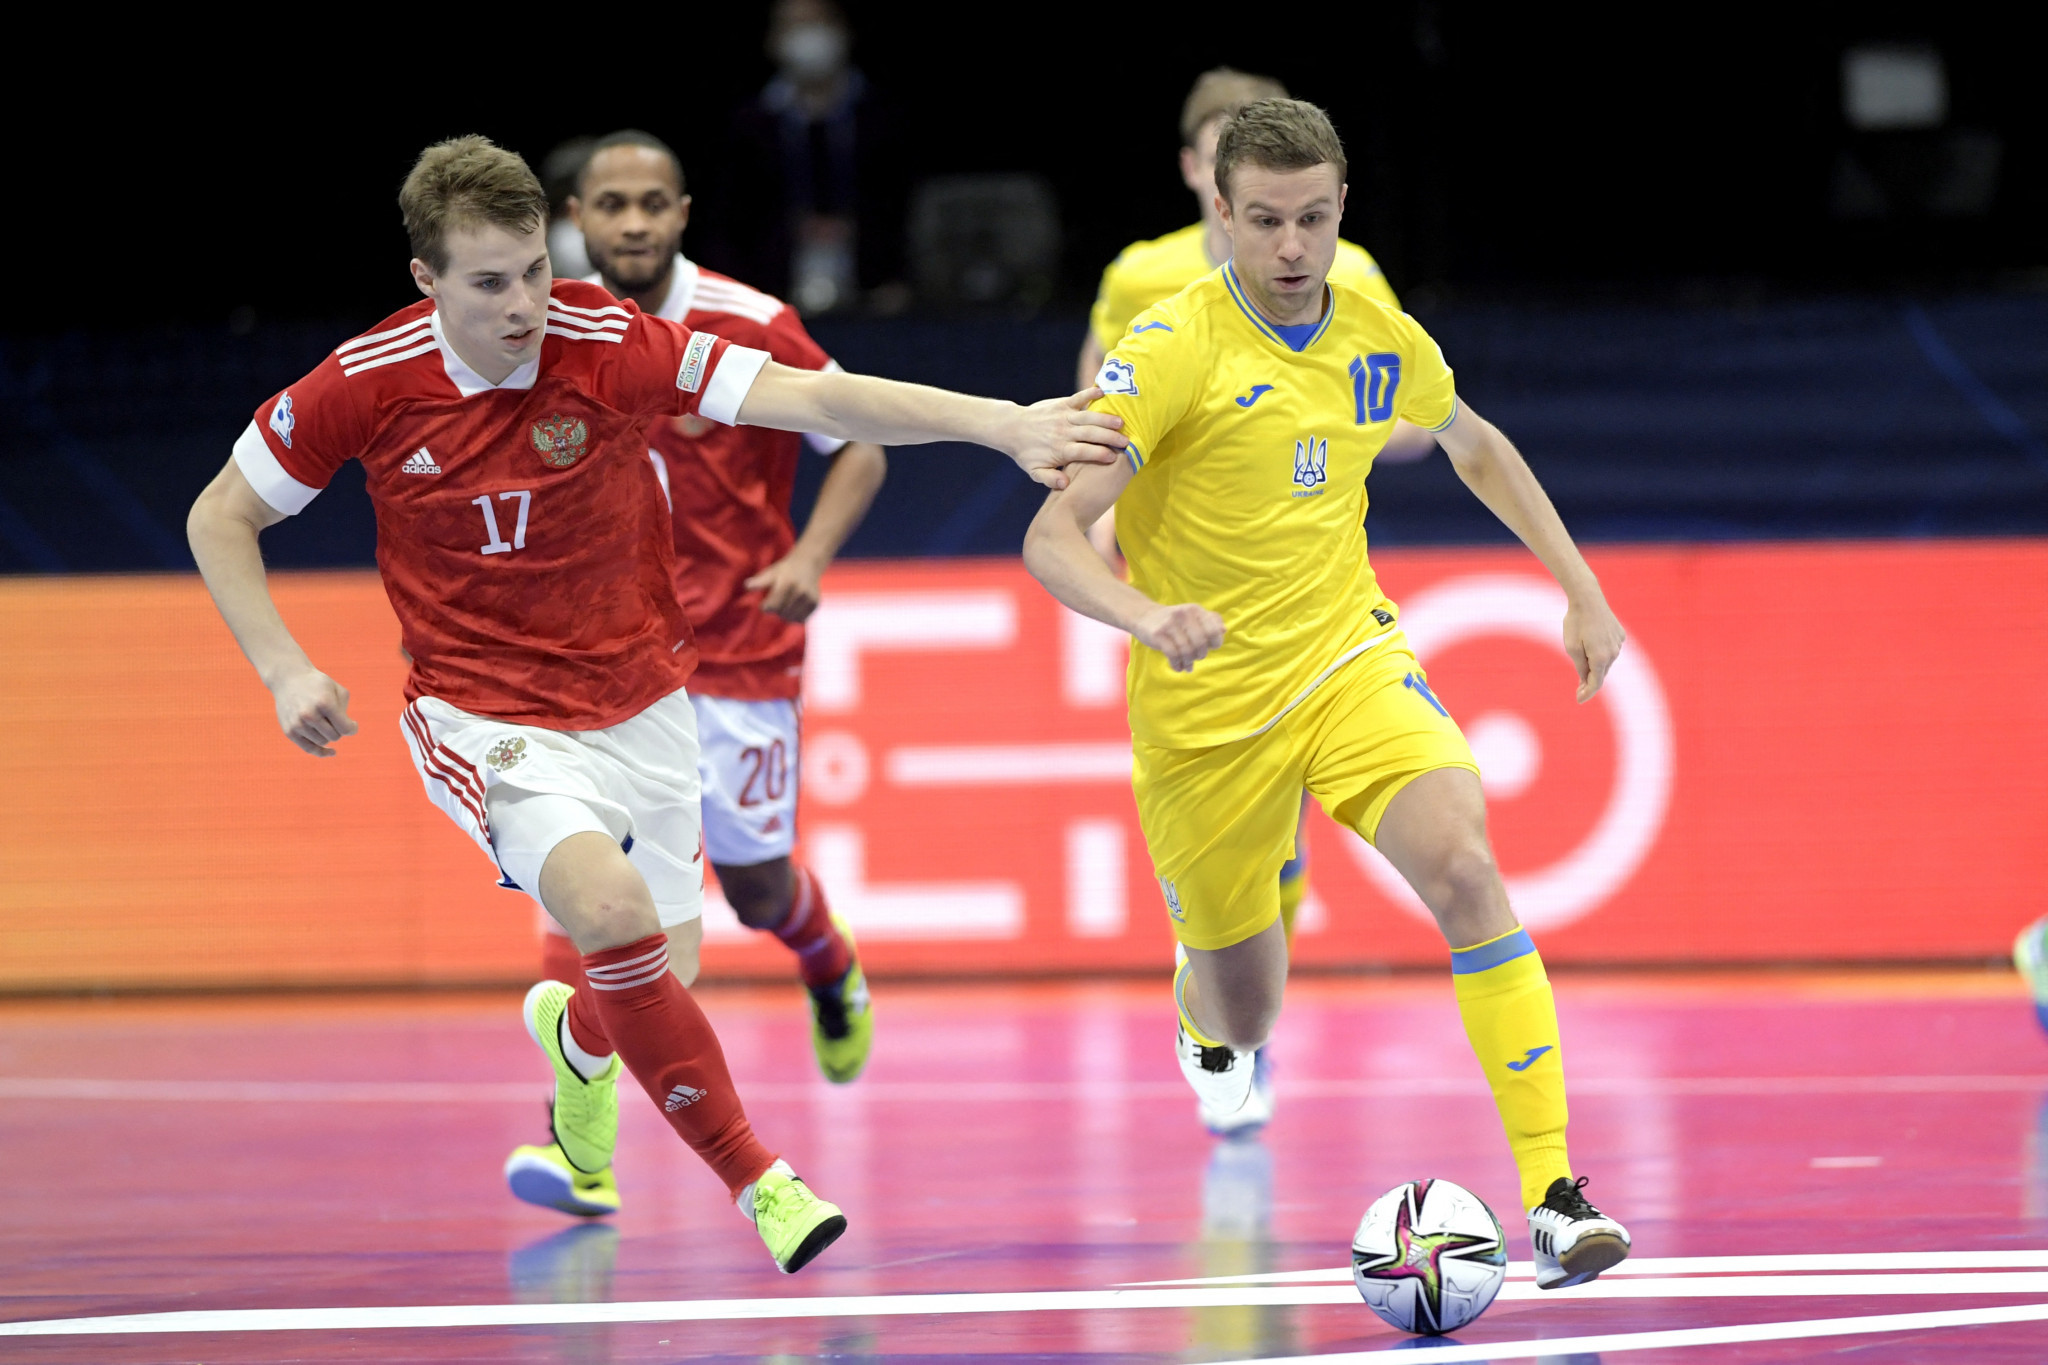 Russia beat Ukraine 3-2 in the European Futsal Championship match before losing the final 4-2 against Portugal ©Getty Images